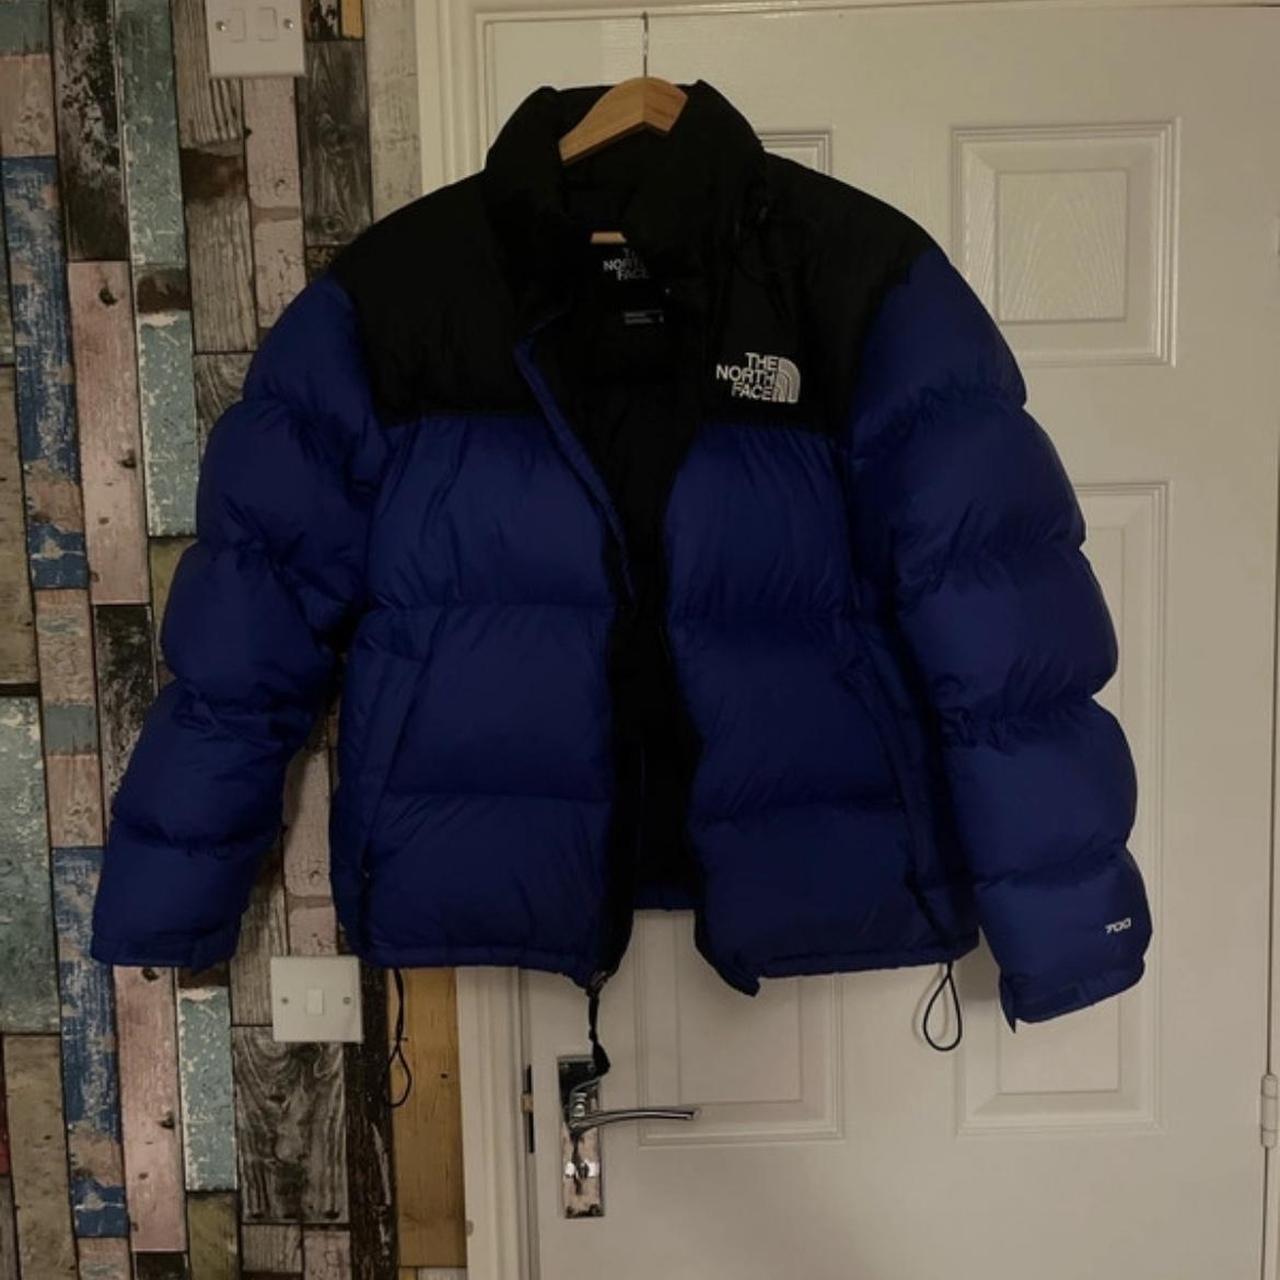 The North Face Men's Navy and Purple Jacket - Depop